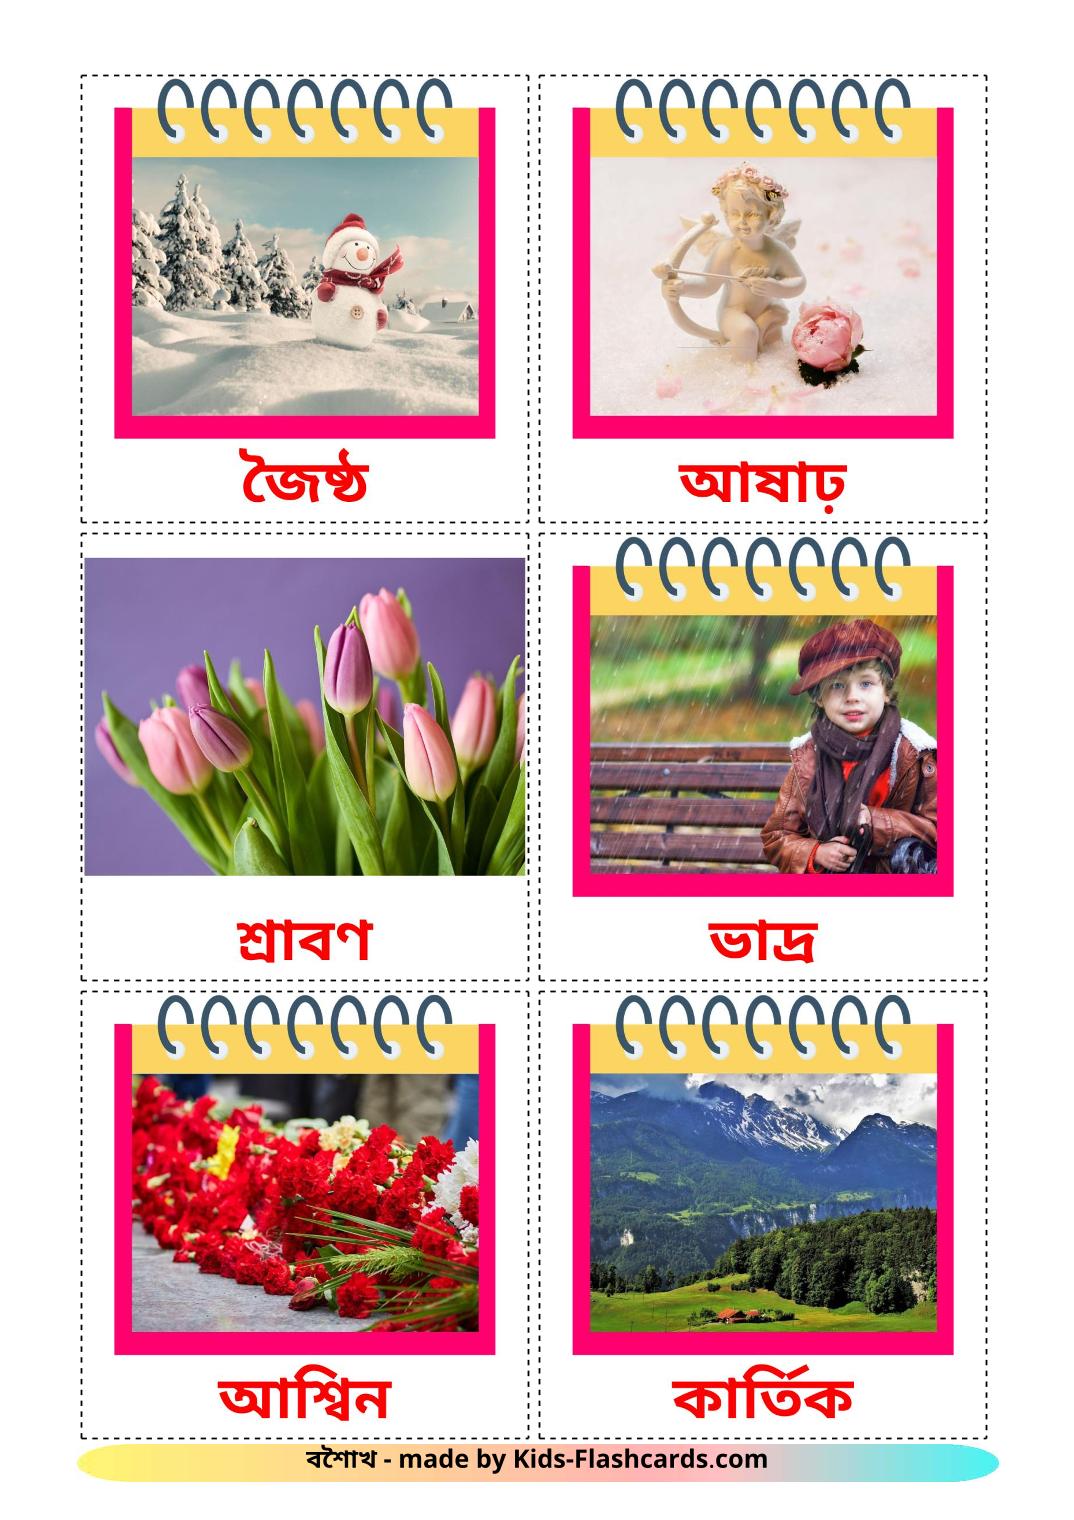 Months of the Year - 12 Free Printable bengali Flashcards 